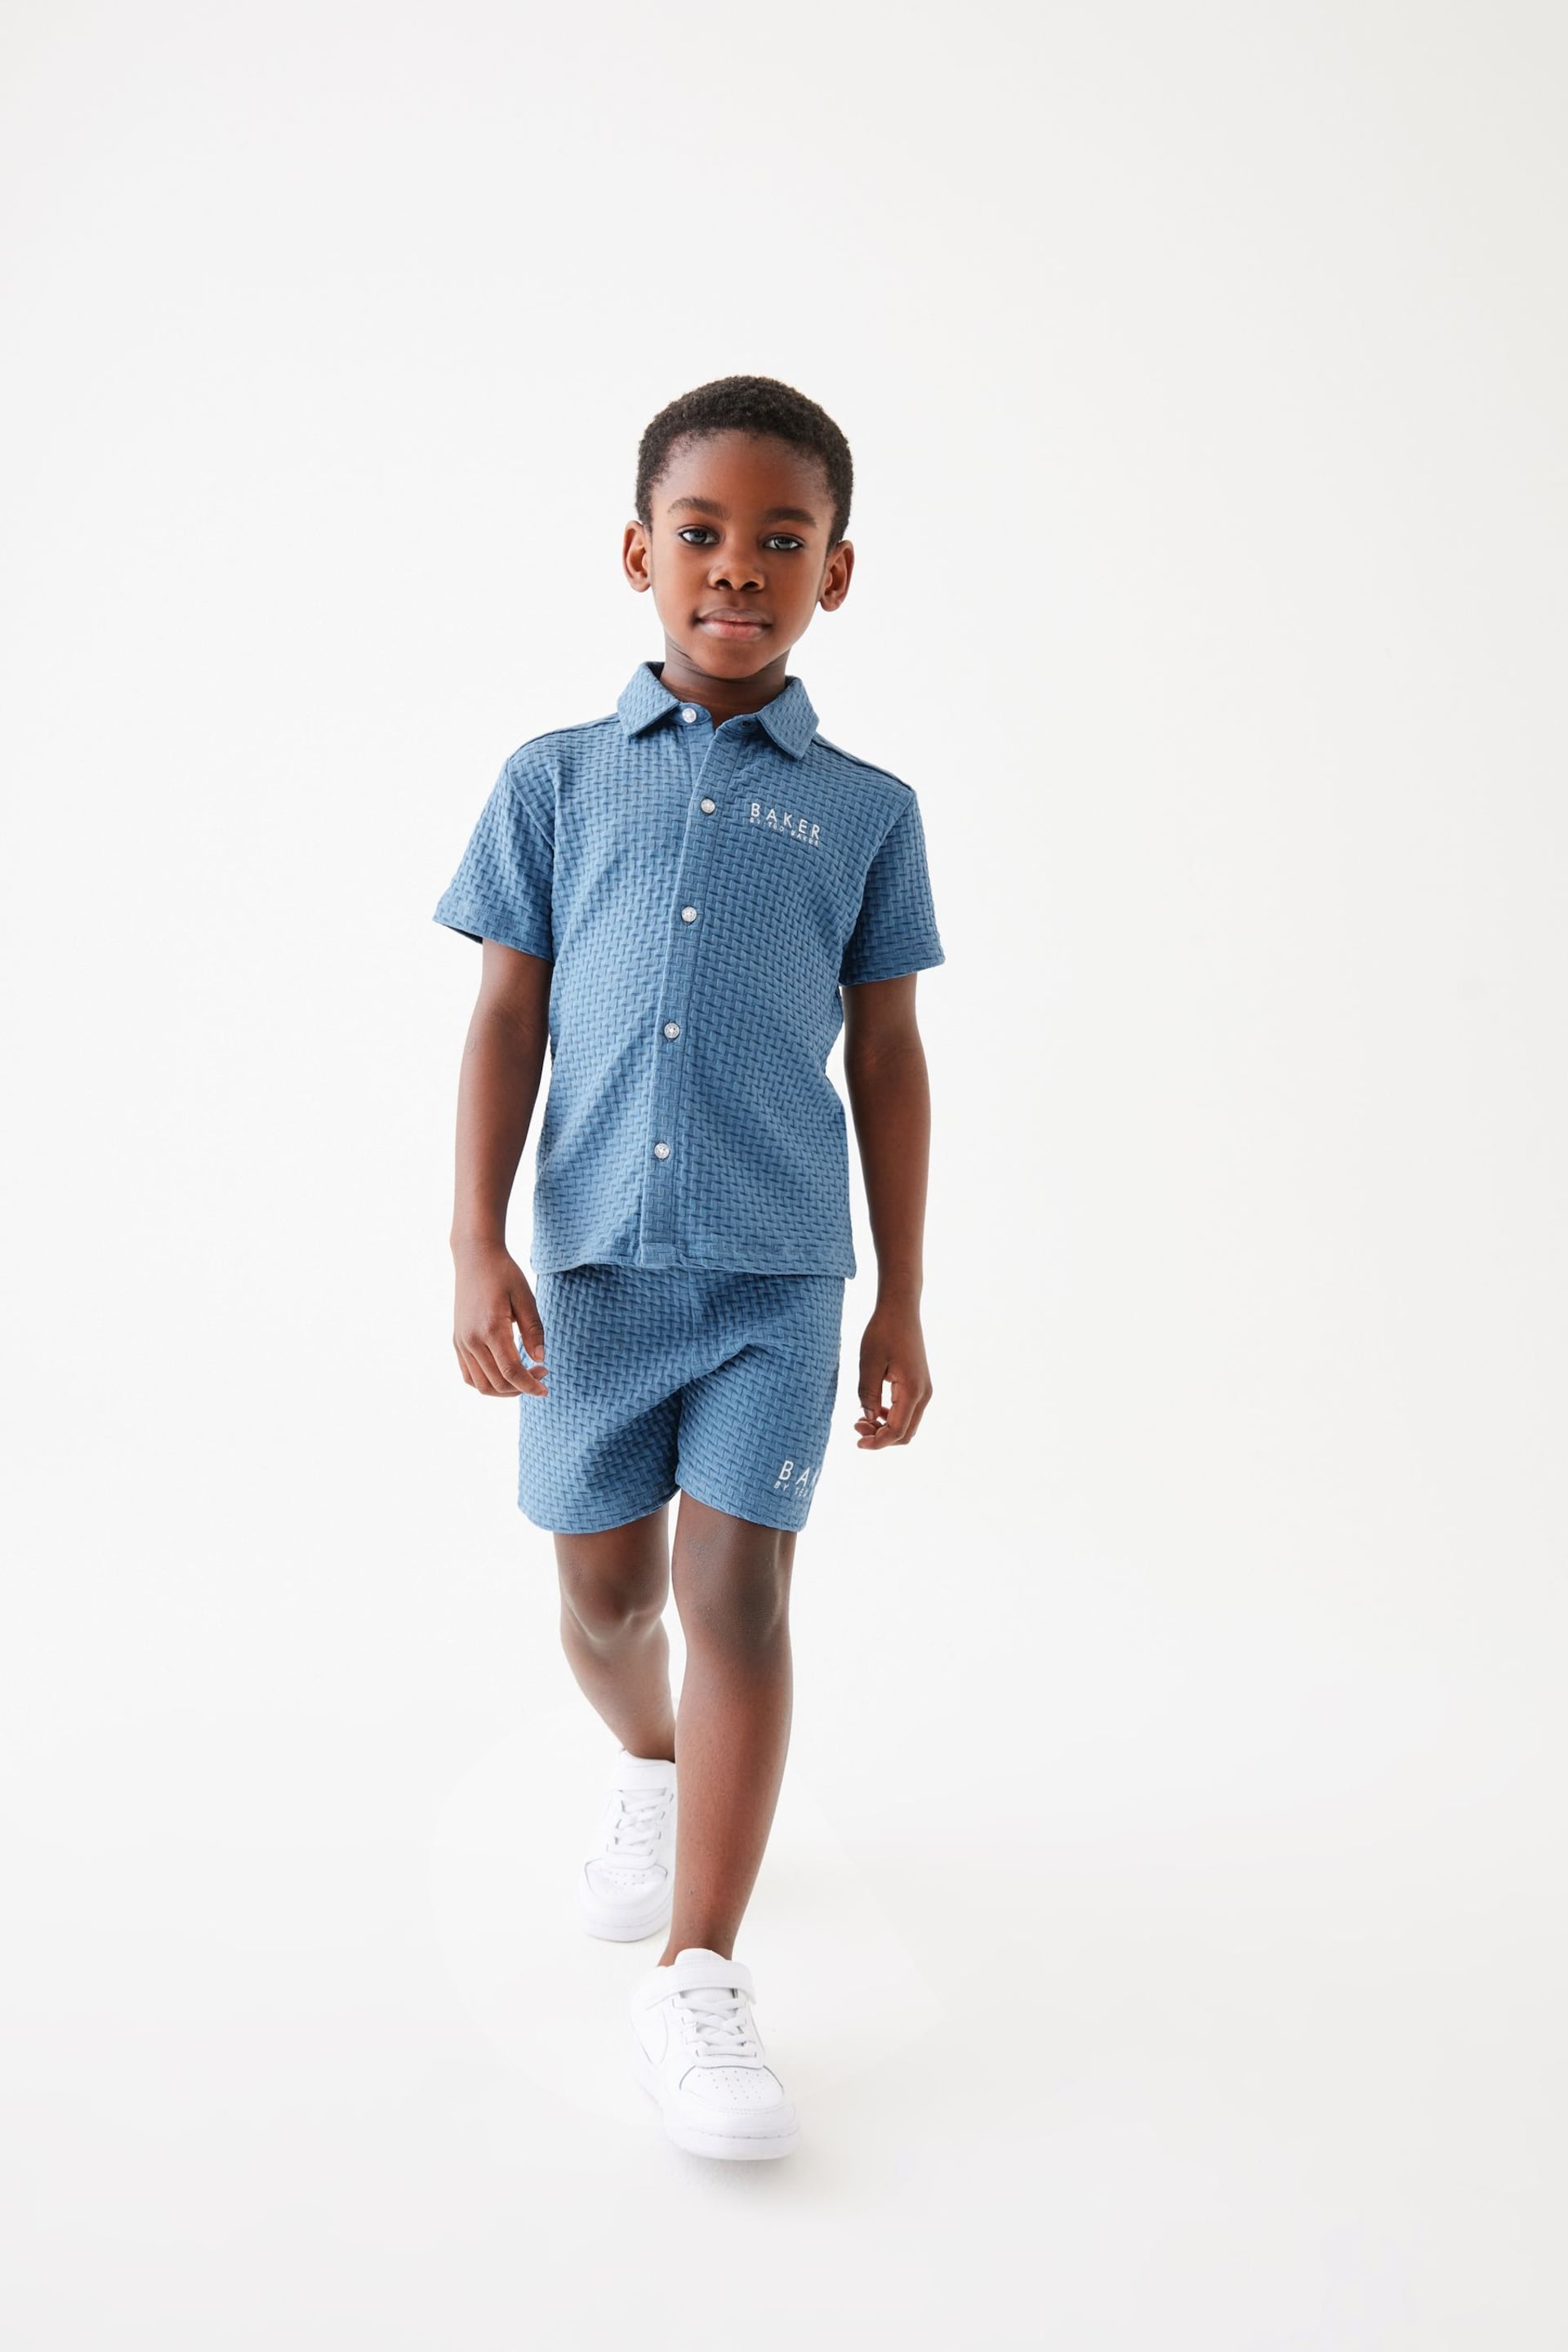 Baker by Ted Baker Textured Polo Shirt and Shorts Set - Image 10 of 14